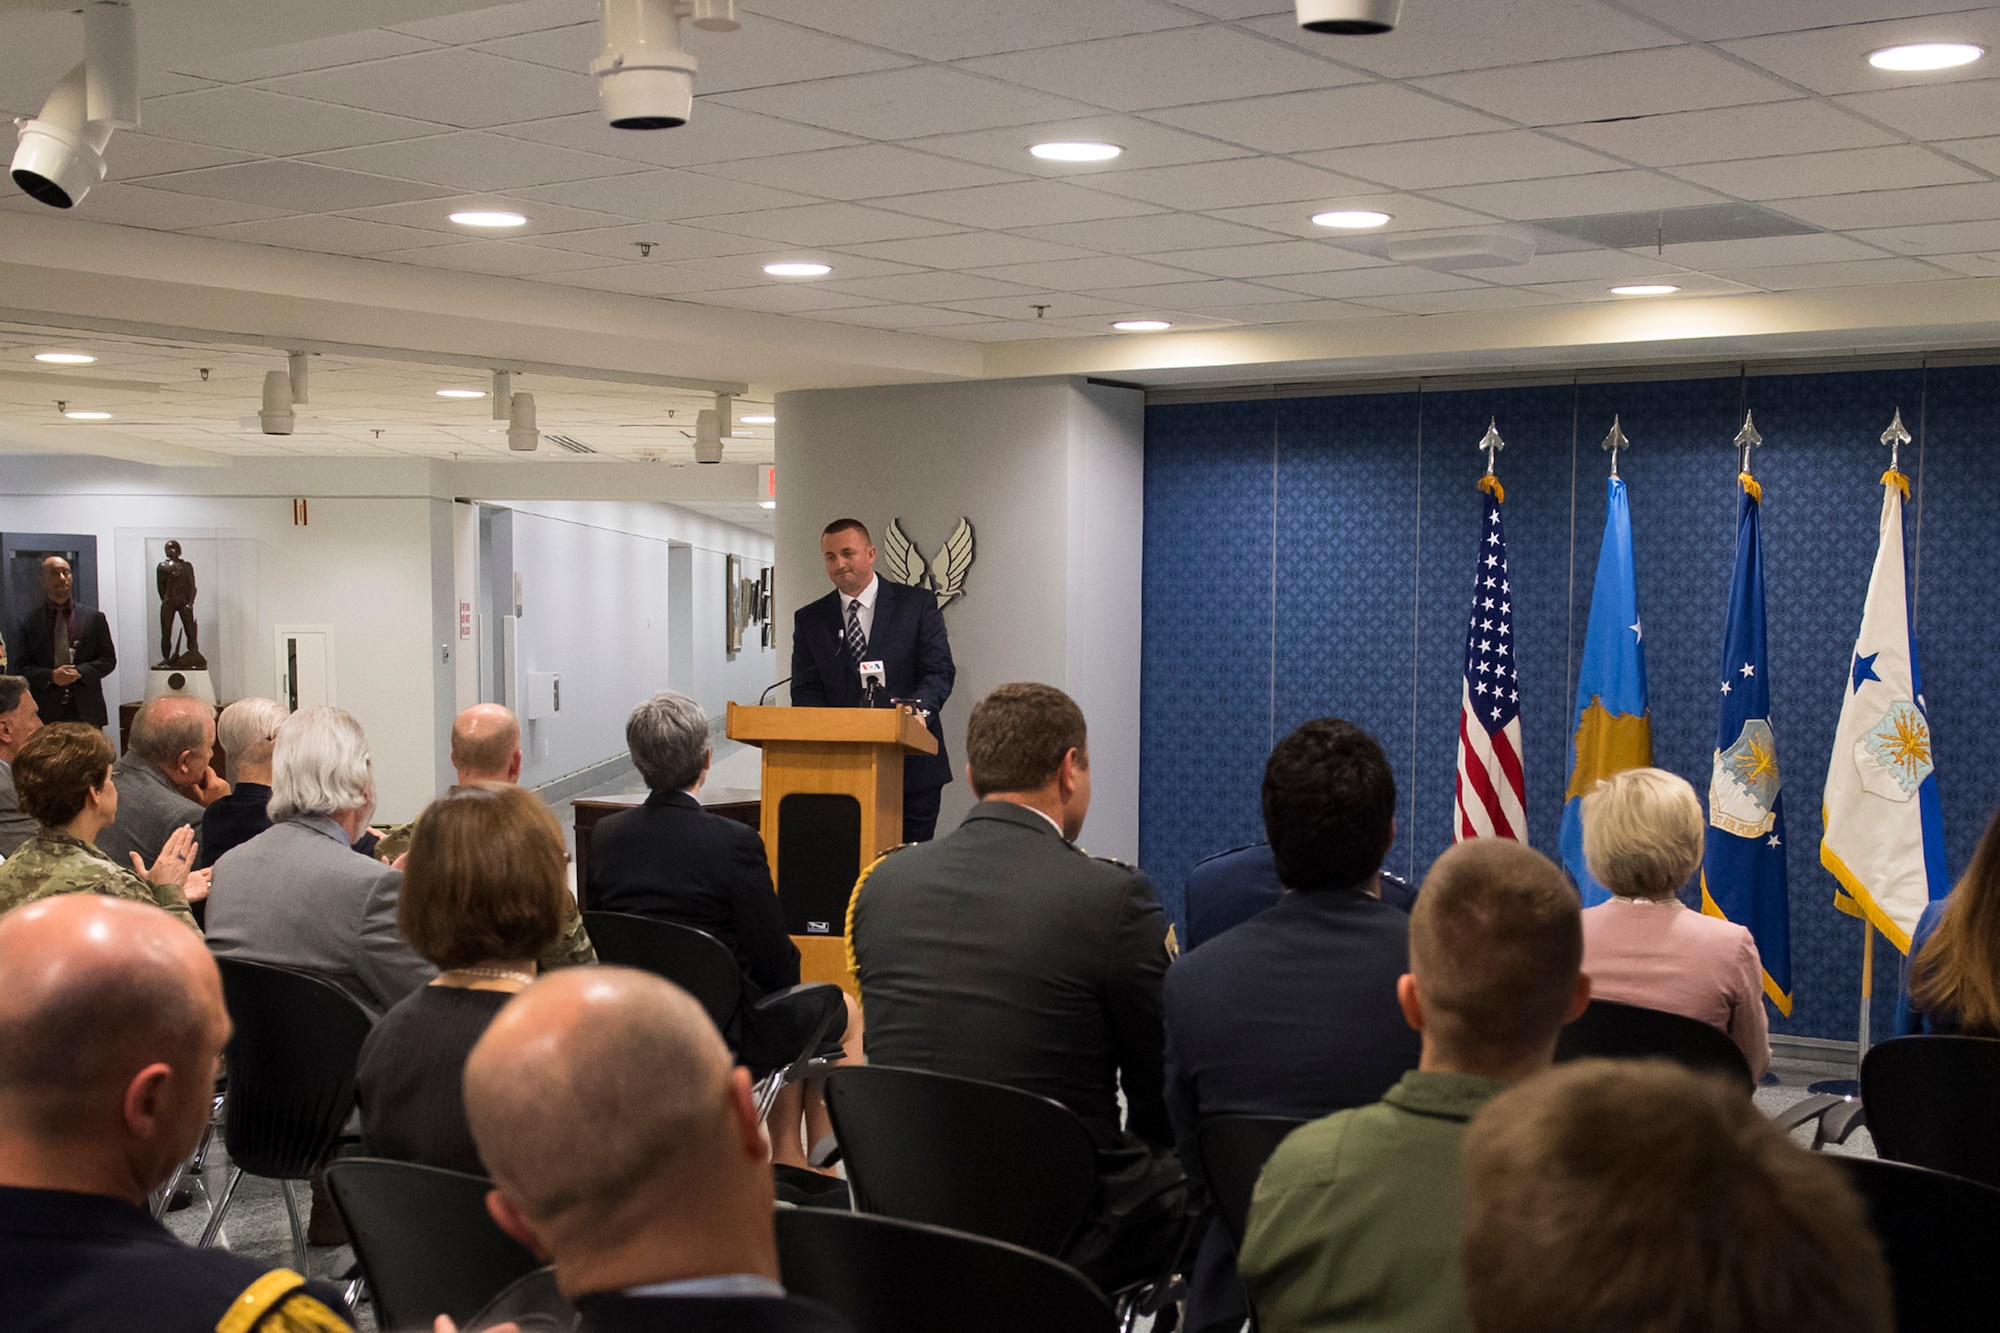 Bombing survivor and honoree, Muharren Alija, recounted his memories of surviving an accidental bombing by NATO fighters, during a ceremony commemorating the 20th anniversary of Operation Allied Force at the Pentagon, Arlington, Va., May 8, 2019. Operation Allied Force was initiated in 1999 by NATO in response to Serbian President Slobodan Milosevic’s campaign of ethnic cleansing of Kosovar Albanians. (U.S. Air Force photo by Adrian Cadiz)